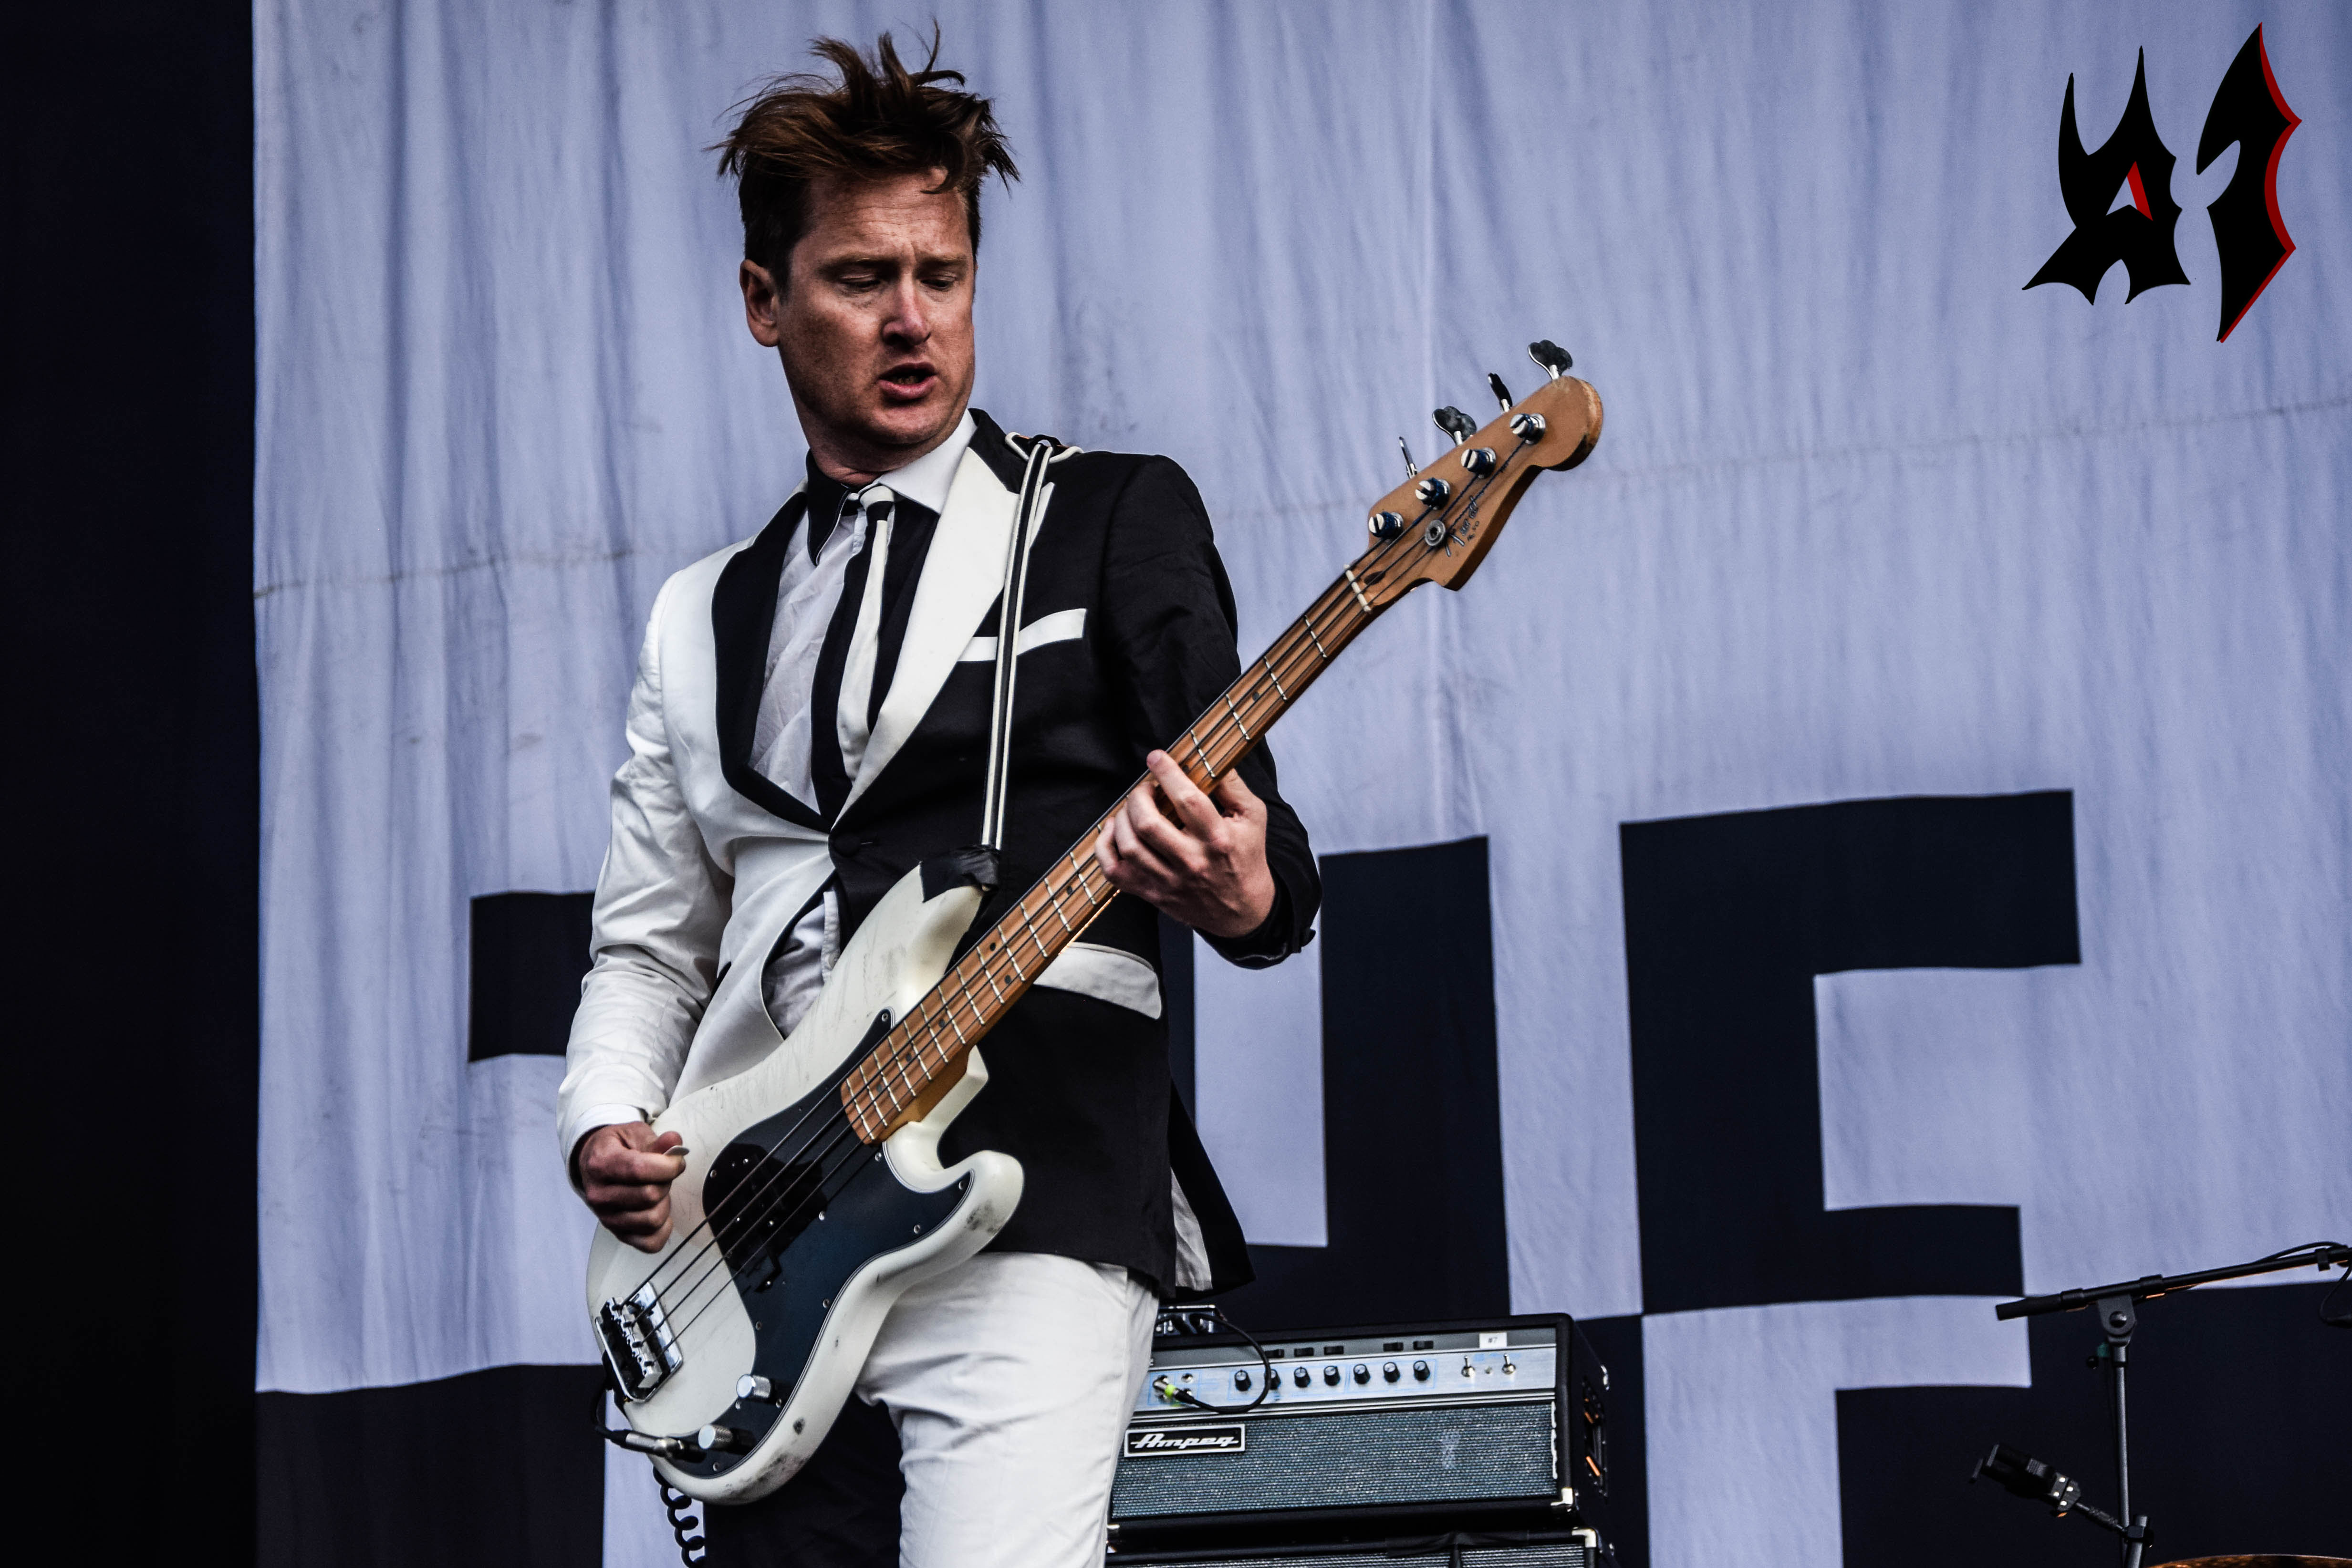 Donwload 2018 – Day 3 - The Hives 6